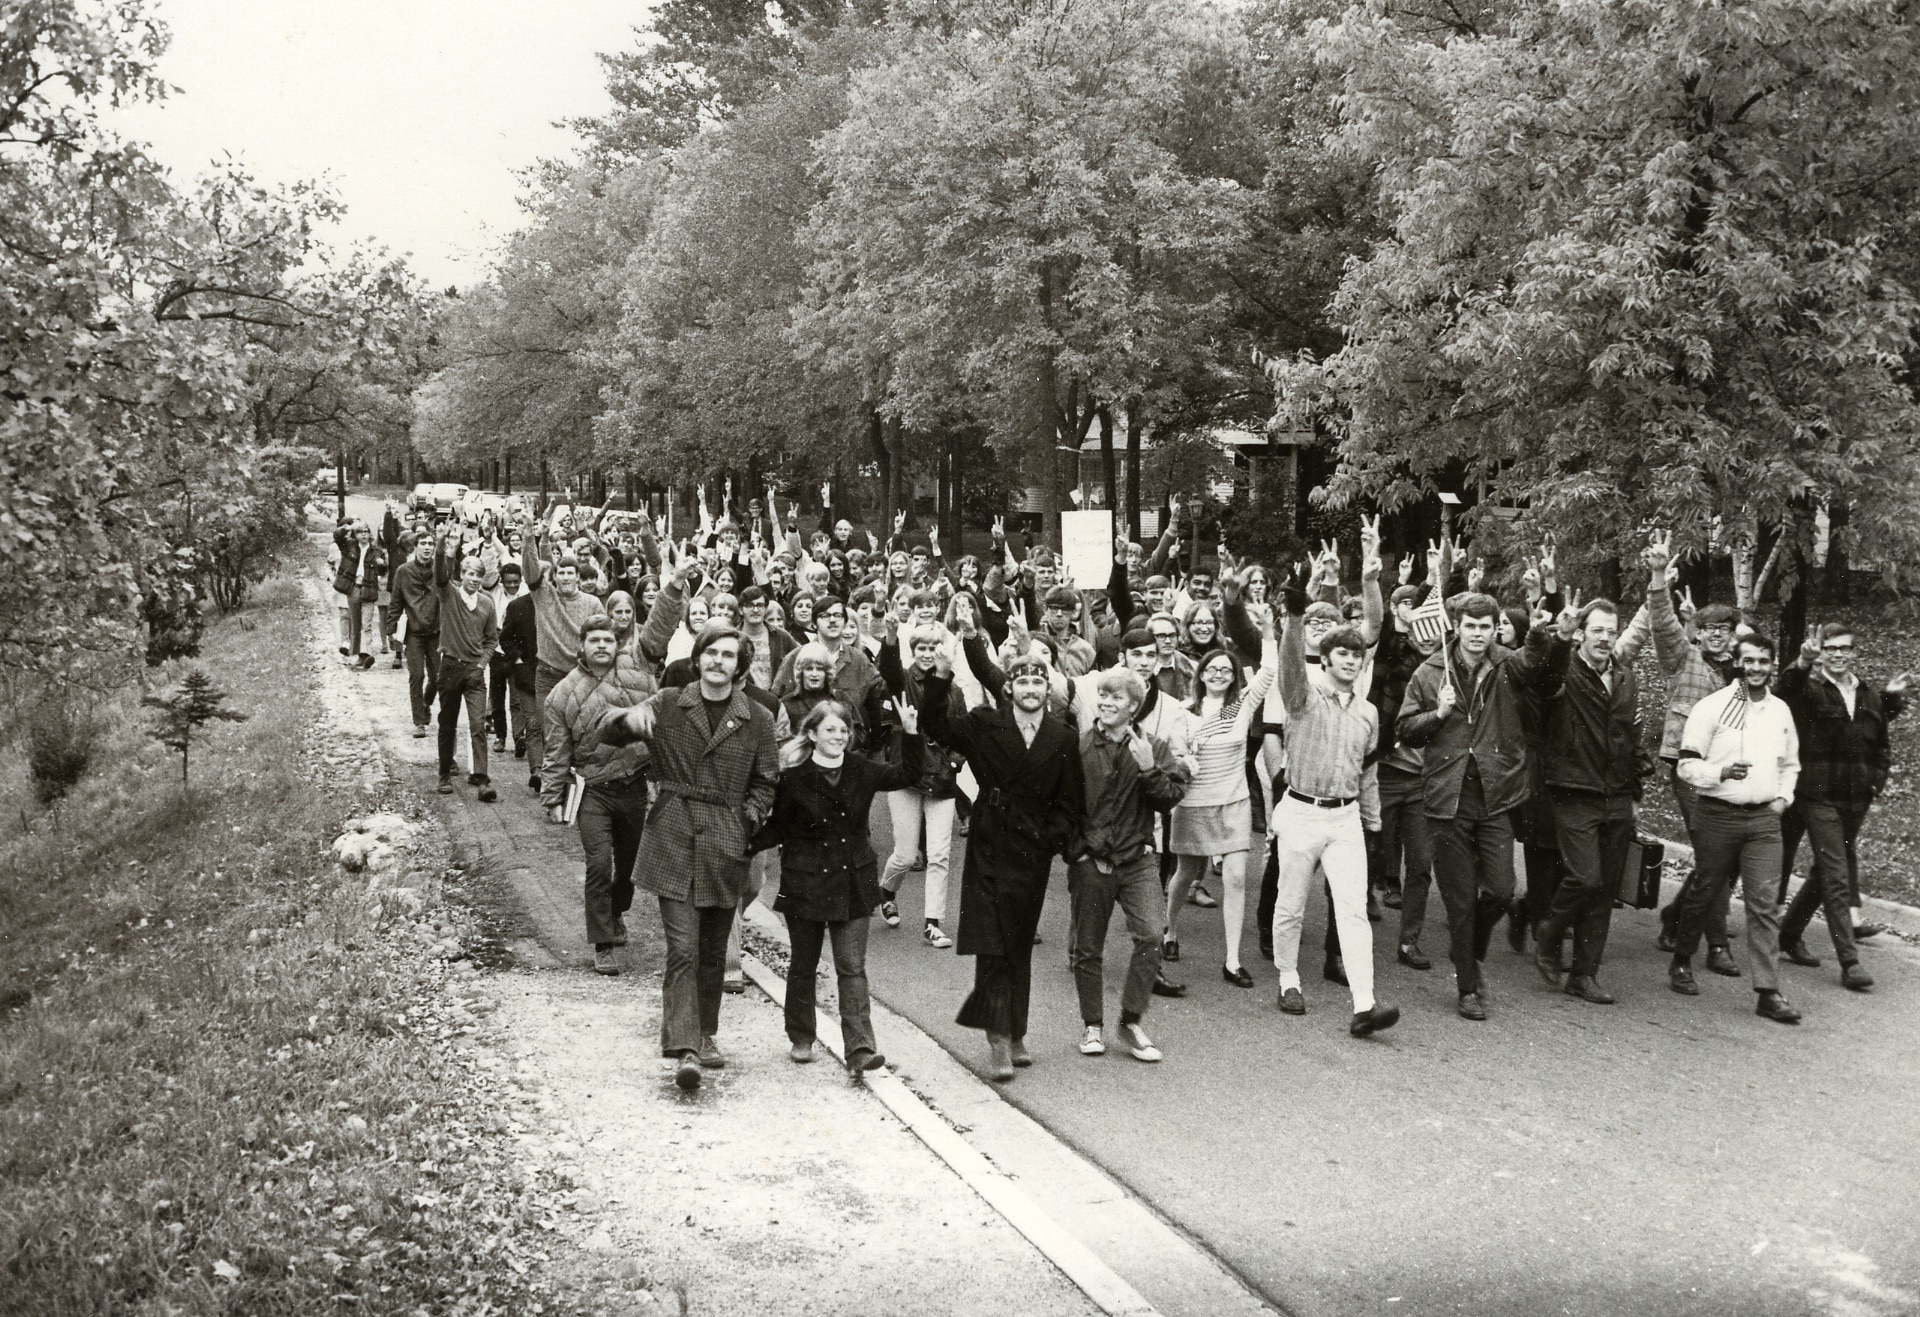 Students protest the Vietnam War with a march through downtown Bemidji.